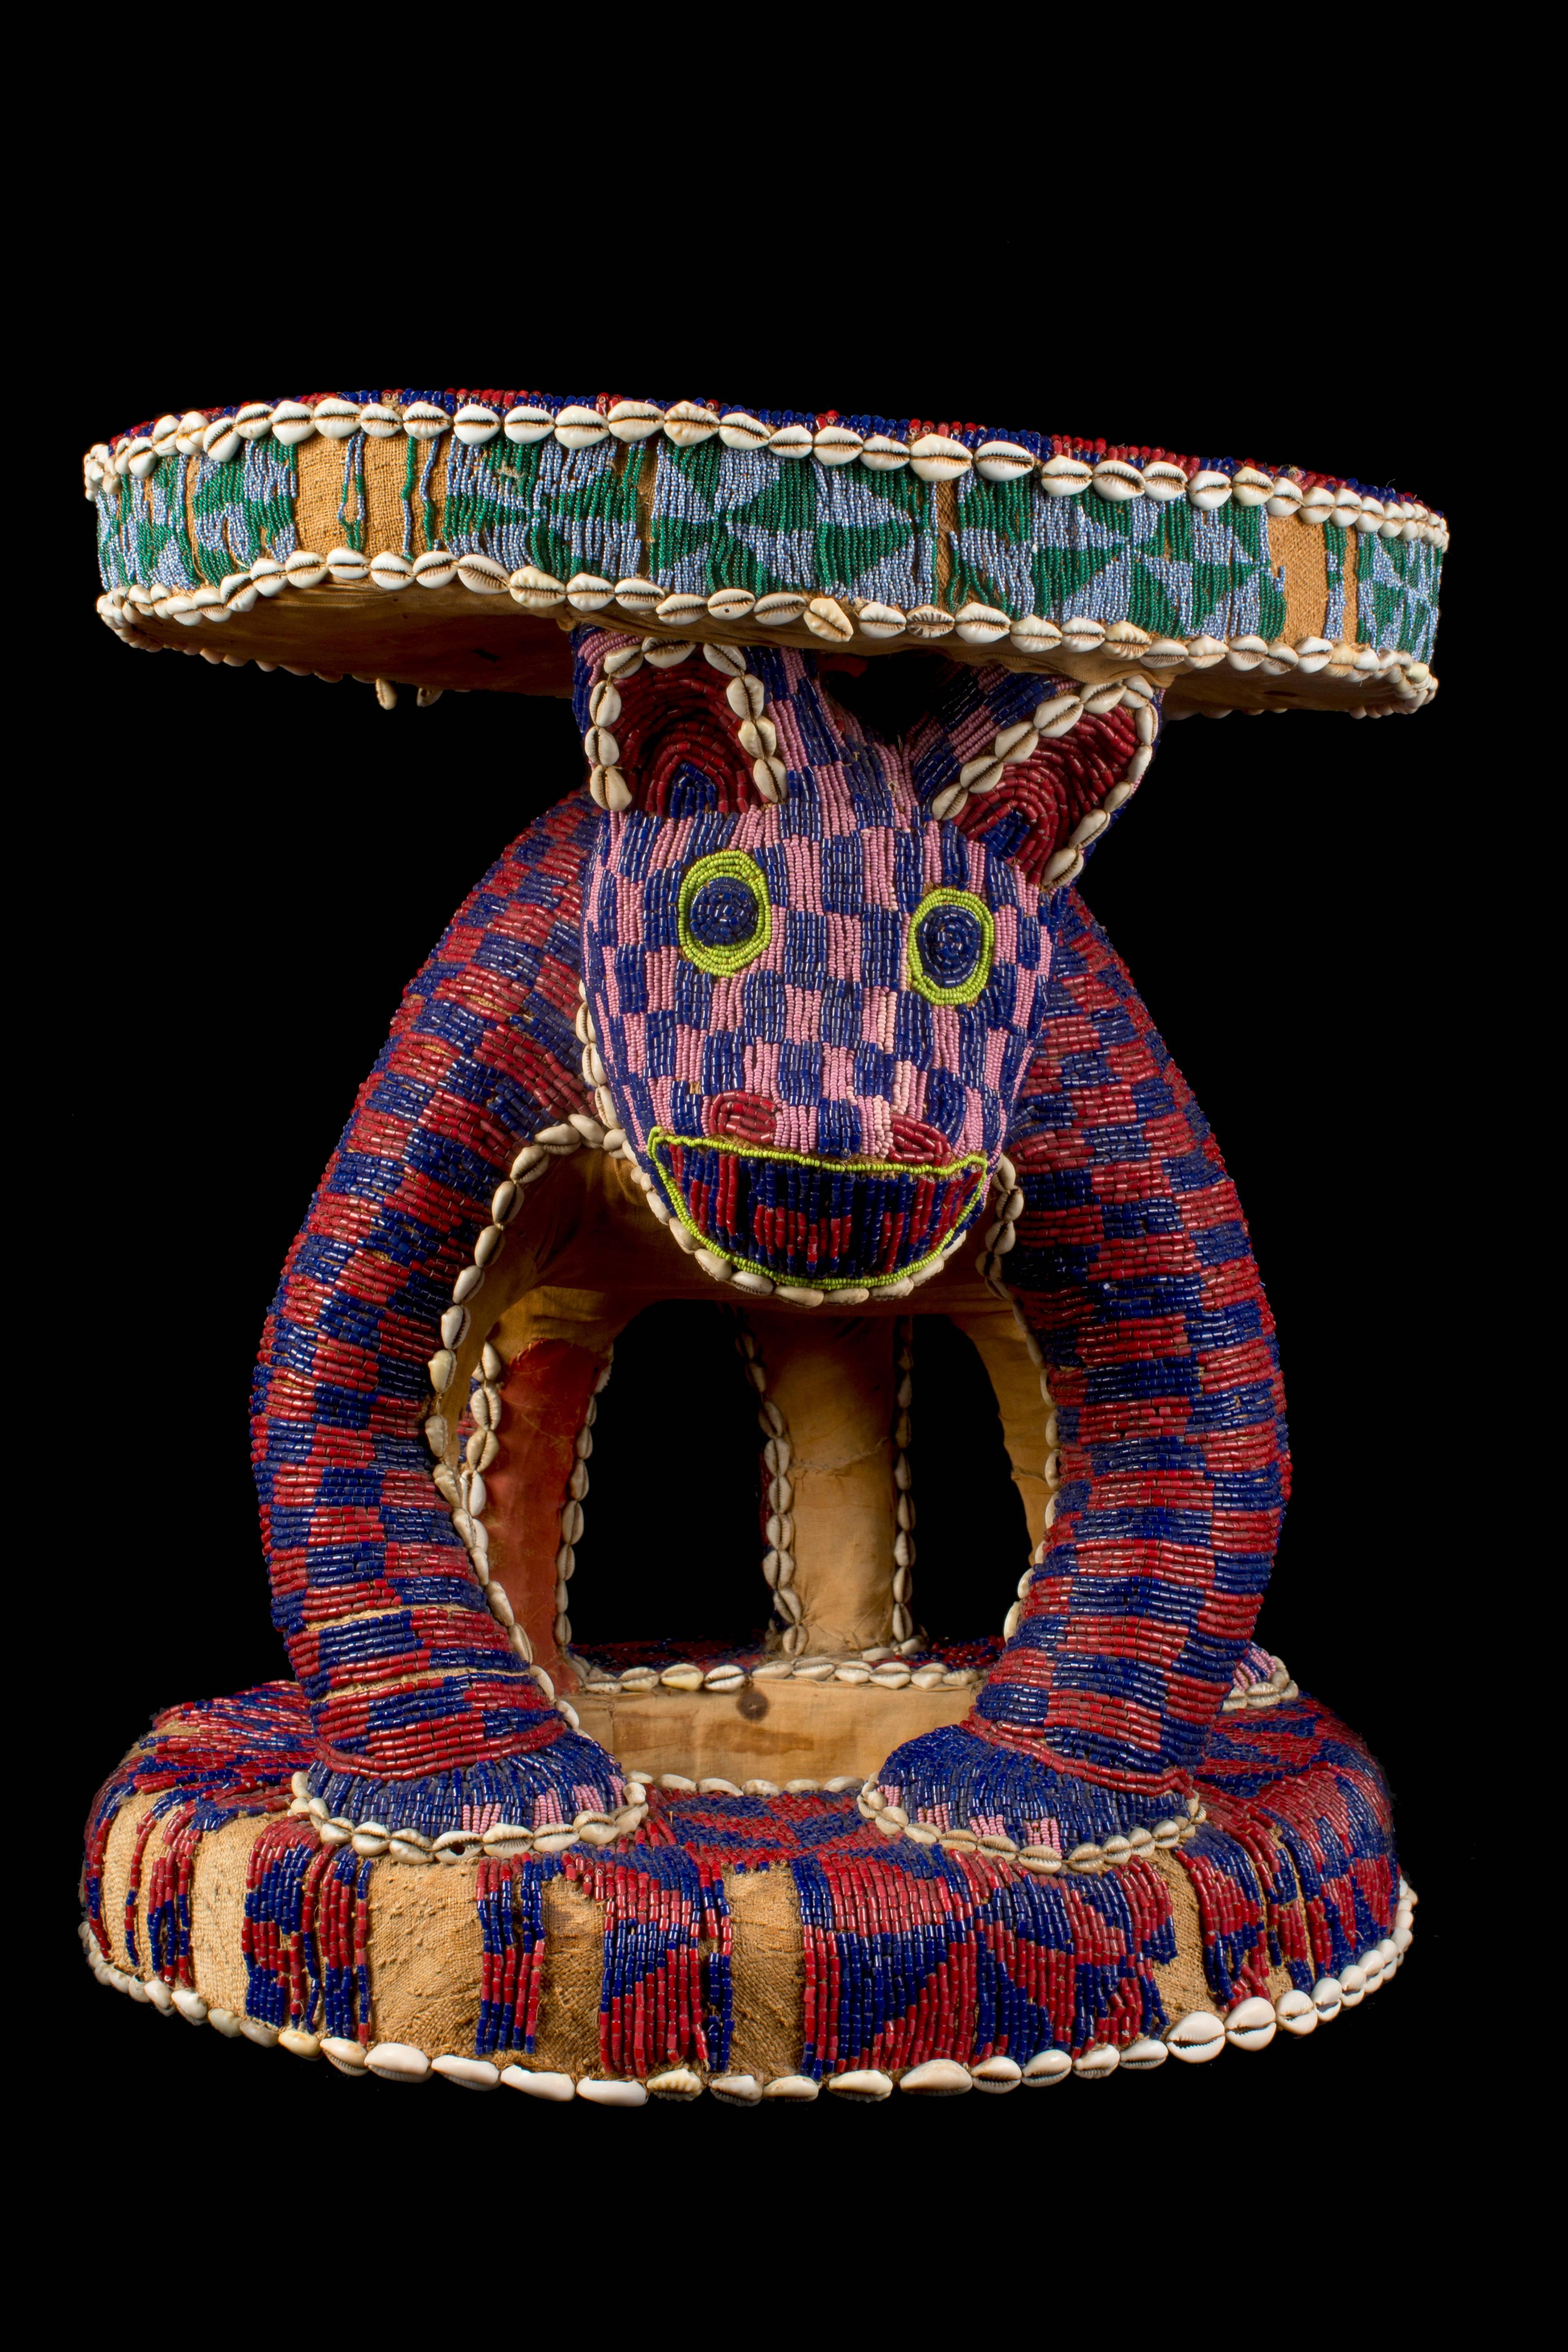 Bamileke throne made with wood, coated with jute, embroidered with polychrome glass beads, cowrie snails, embroidery with glass beads that are missing in some areas. In the Grassfield Kingdoms the leopard was looked upon as a symbol of royal power